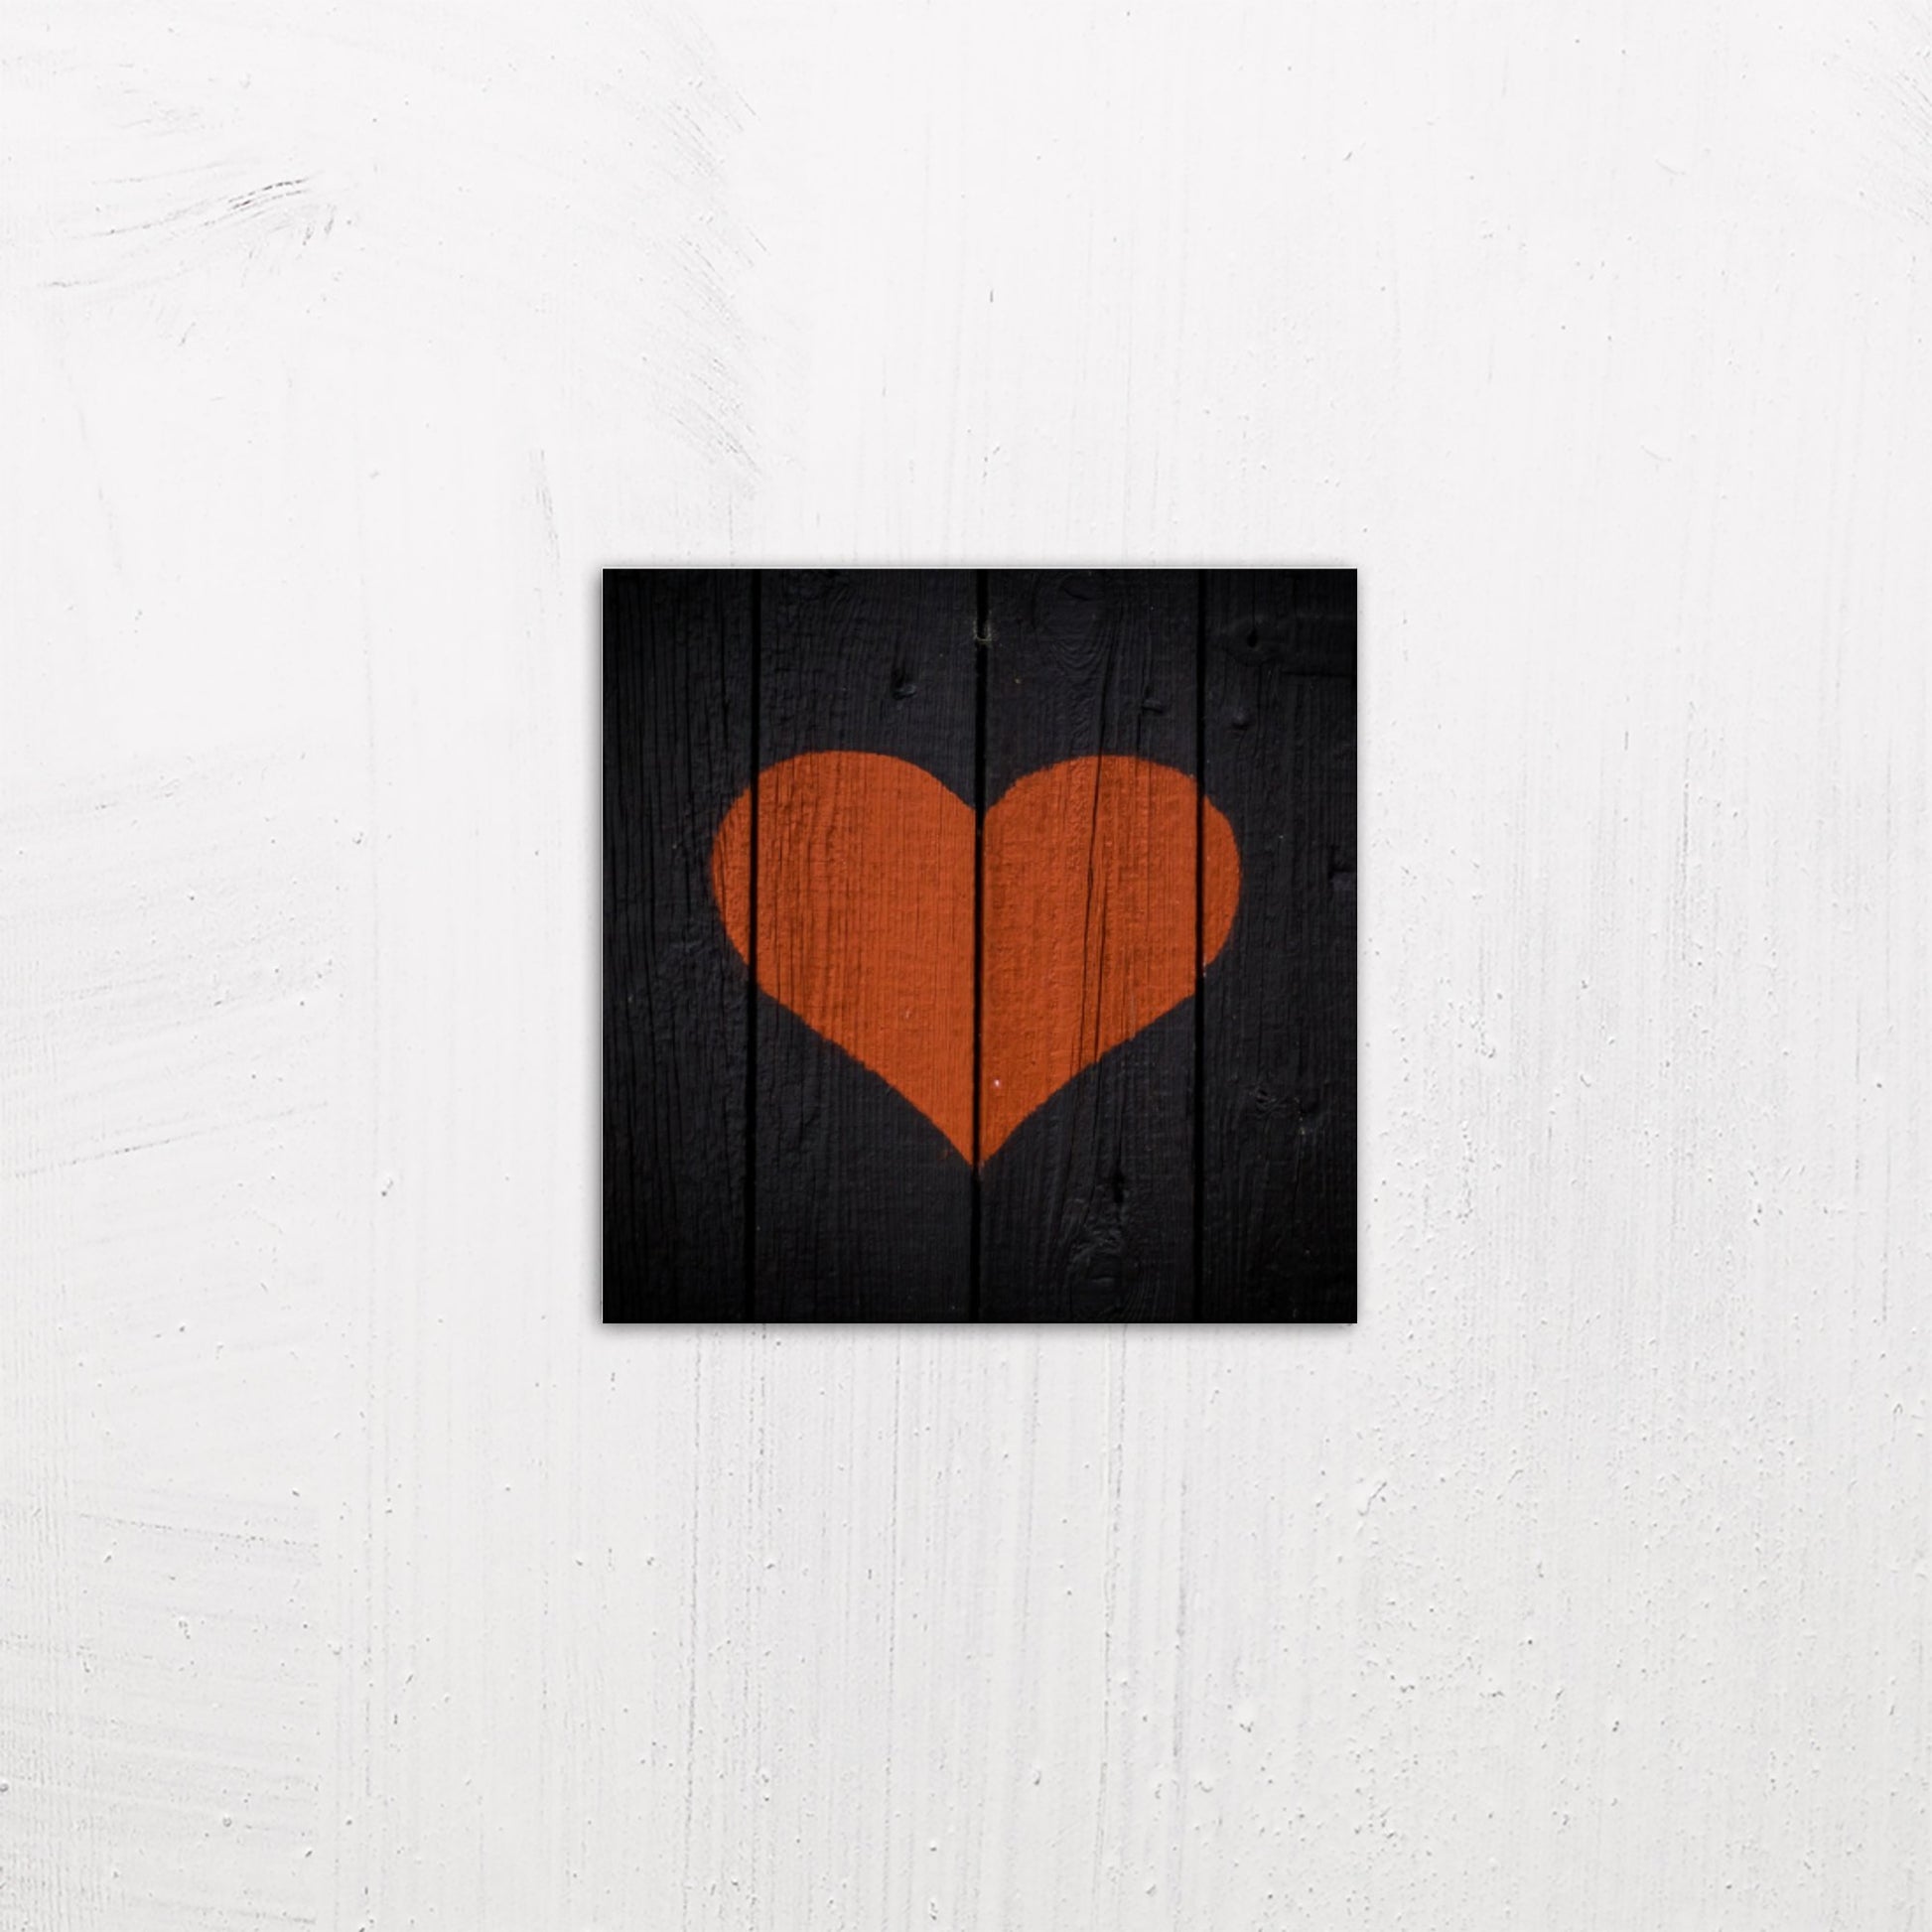 A small size metal art poster display plate with printed design of a Painted Wooden Heart